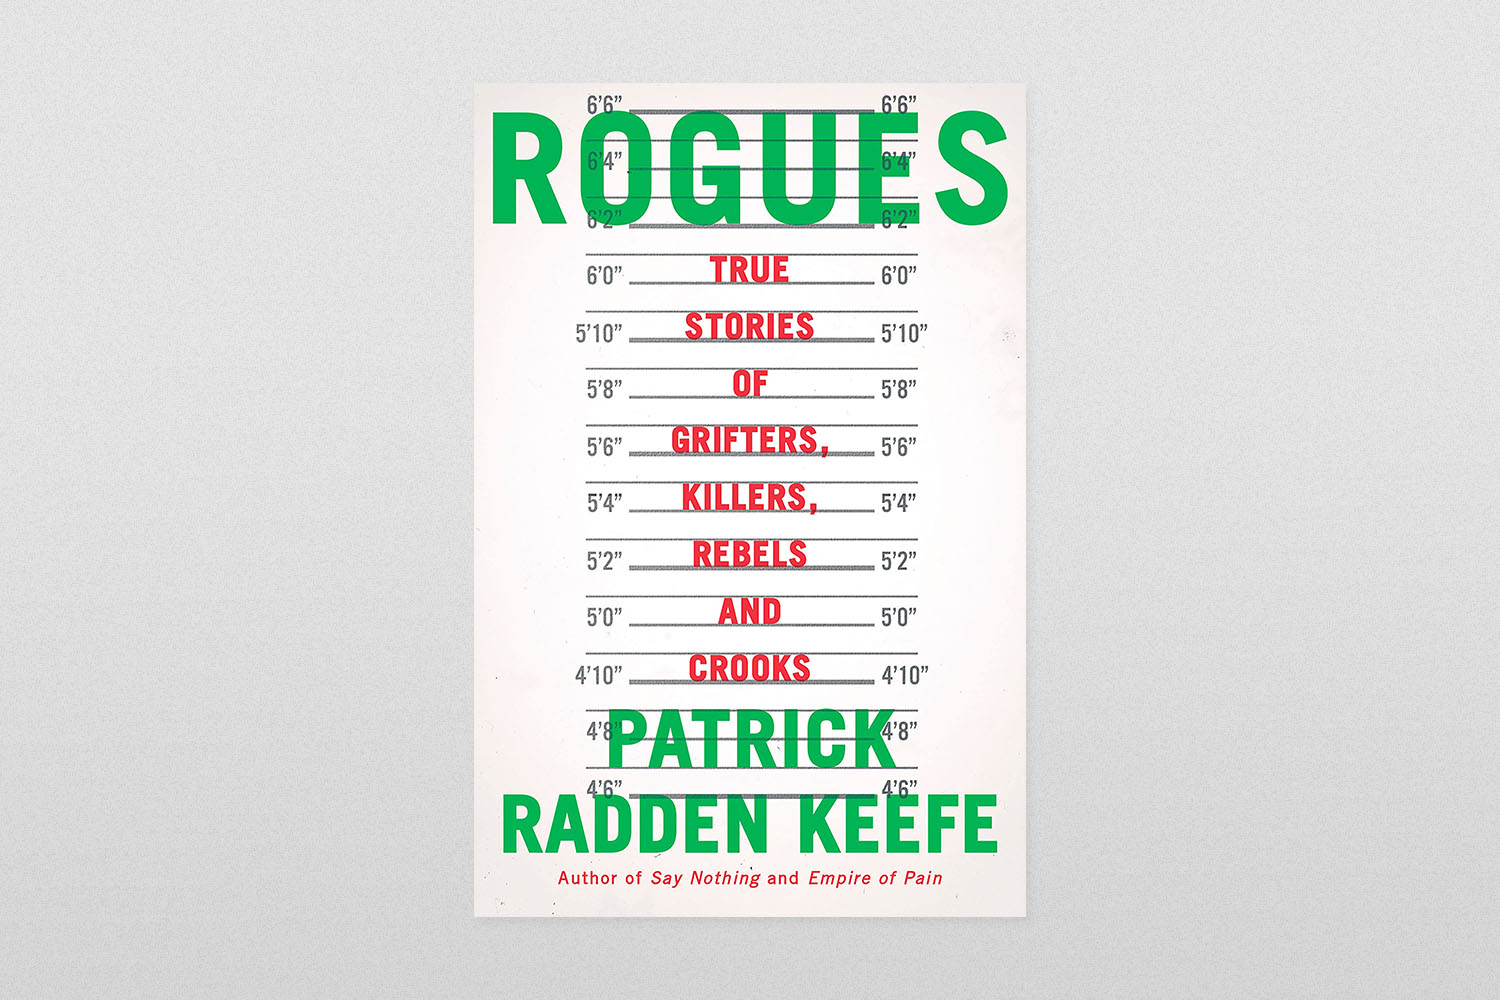 Rogues- True Stories of Grifters, Killers, Rebels and Crooks by Patrick Radden Keefe